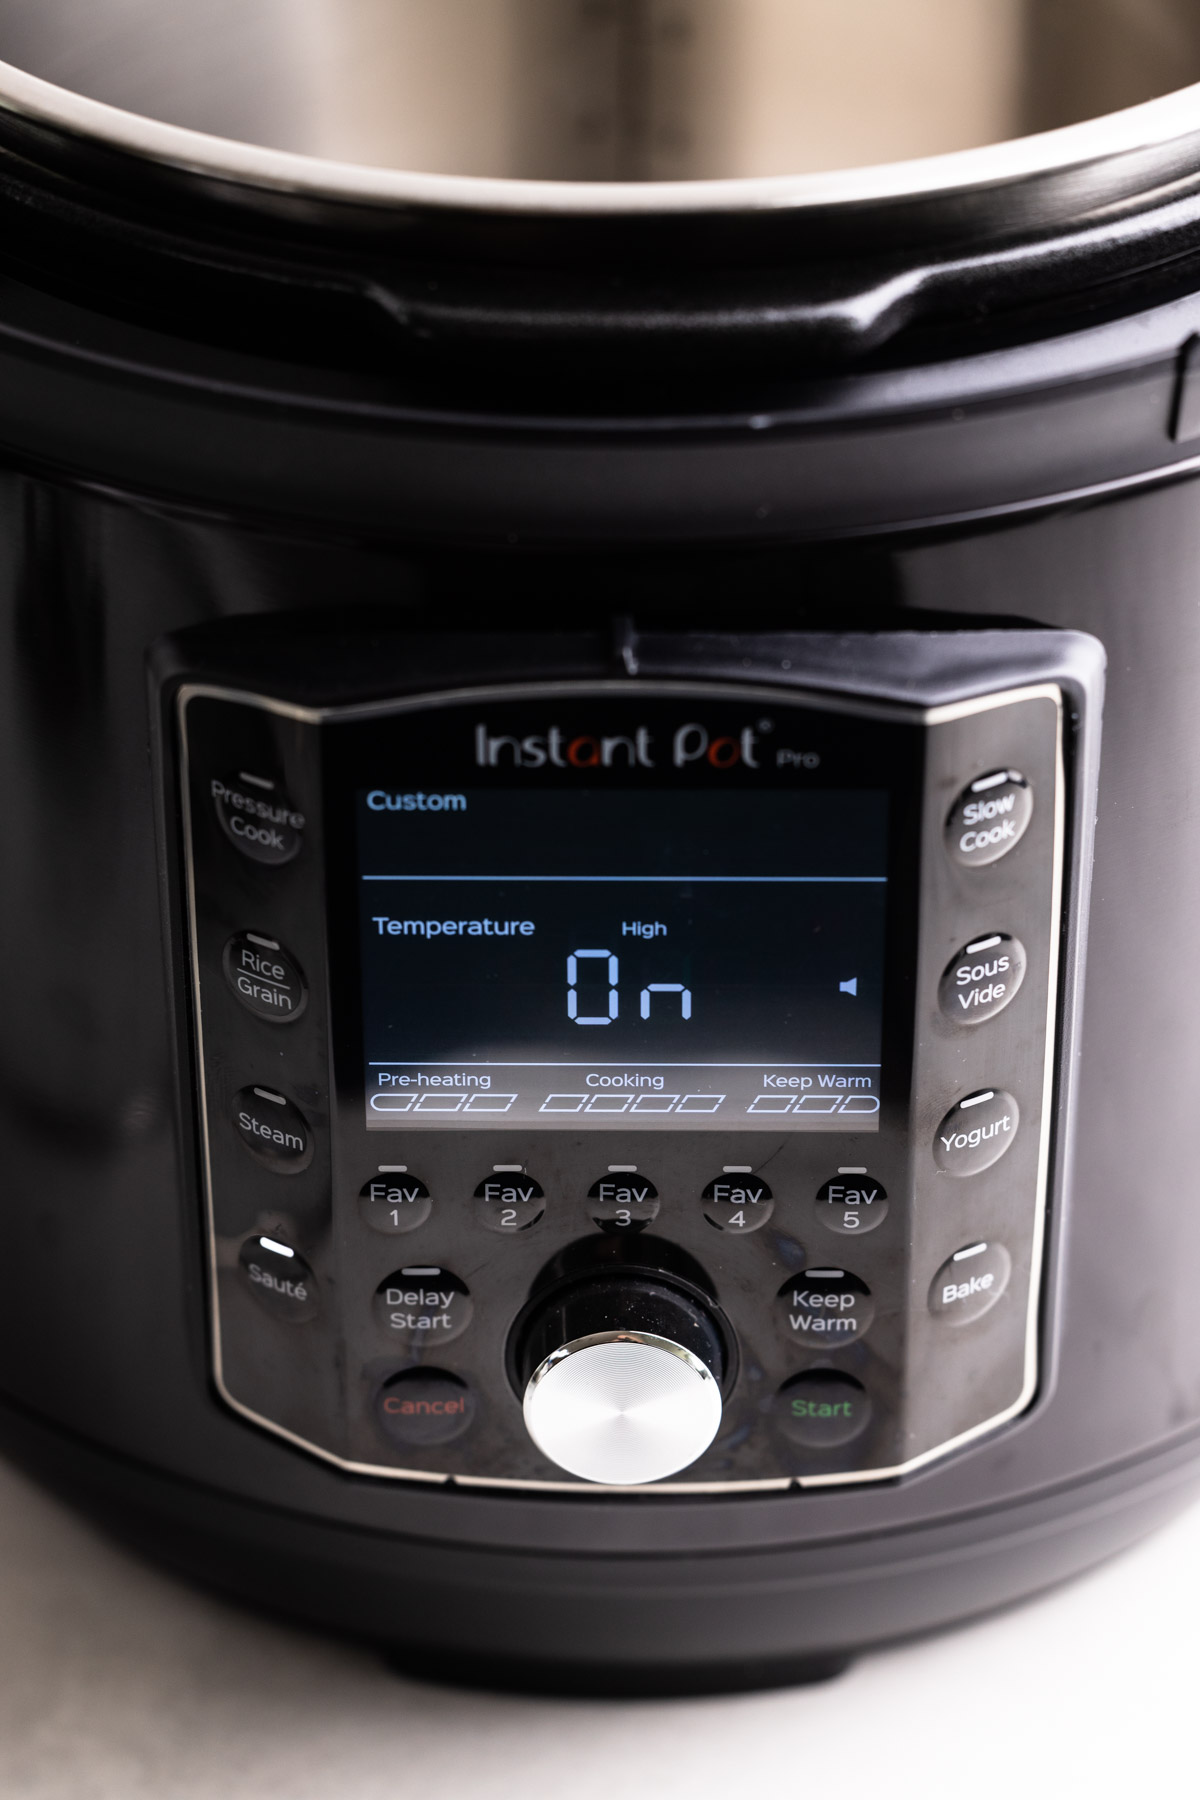 An instant pot turned on with a visible on sign.